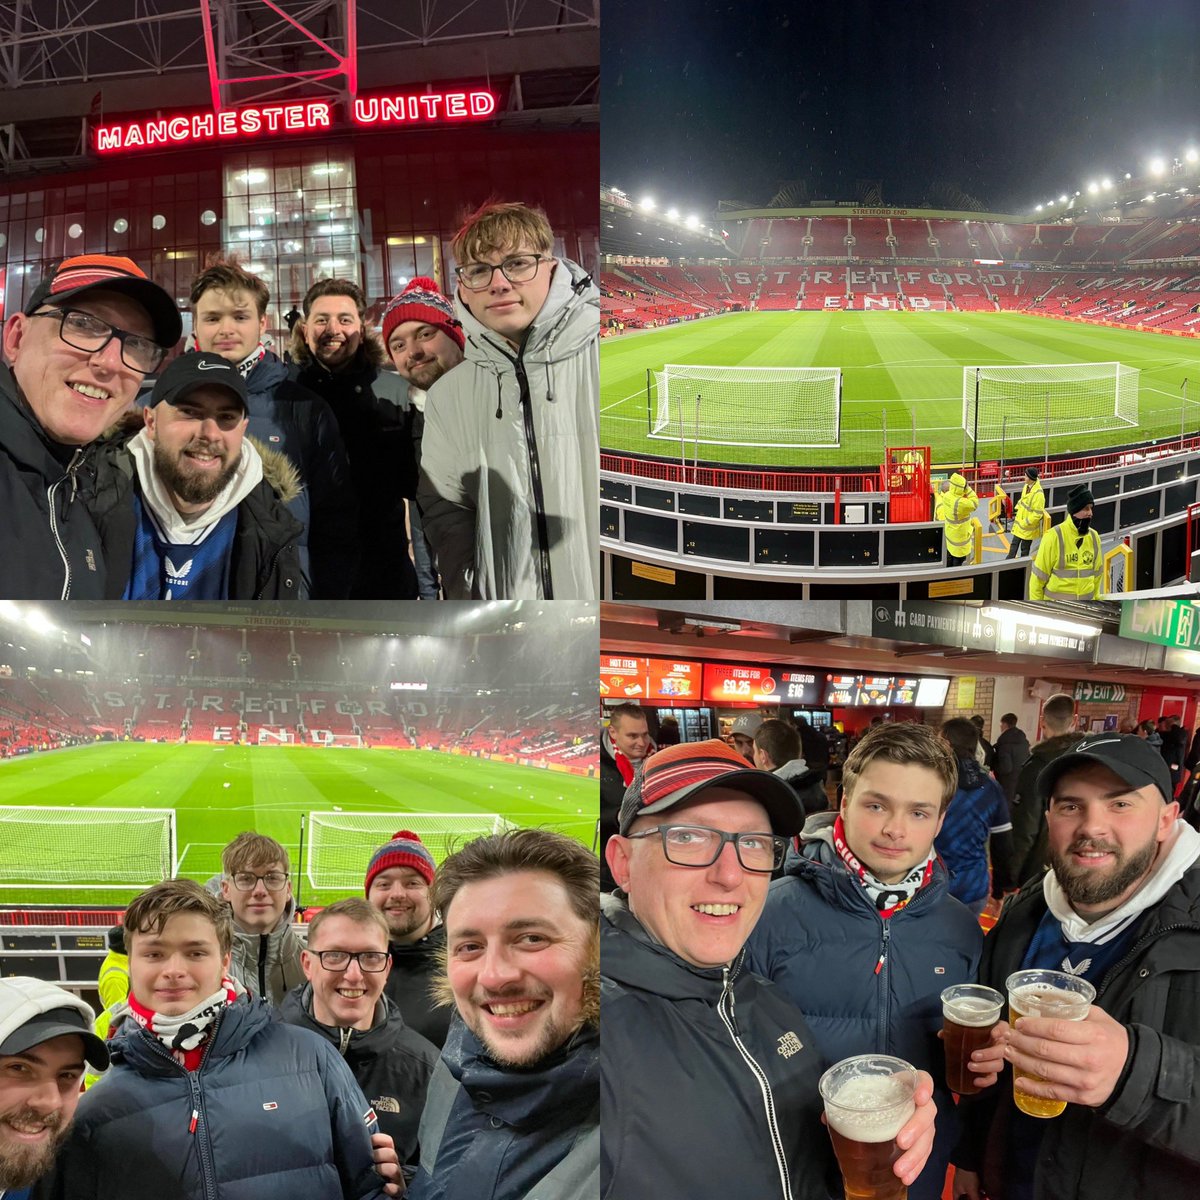 Looking forward to spending an evening making memories with these handsome fellows. Watching the mighty Charlton Athletic face Man Utd at Old Trafford in the Quarter Final of the Carabao Cup.. the stuff dreams are made of… let’s go!!! #cafc #coyr #manymileshaveitravelled